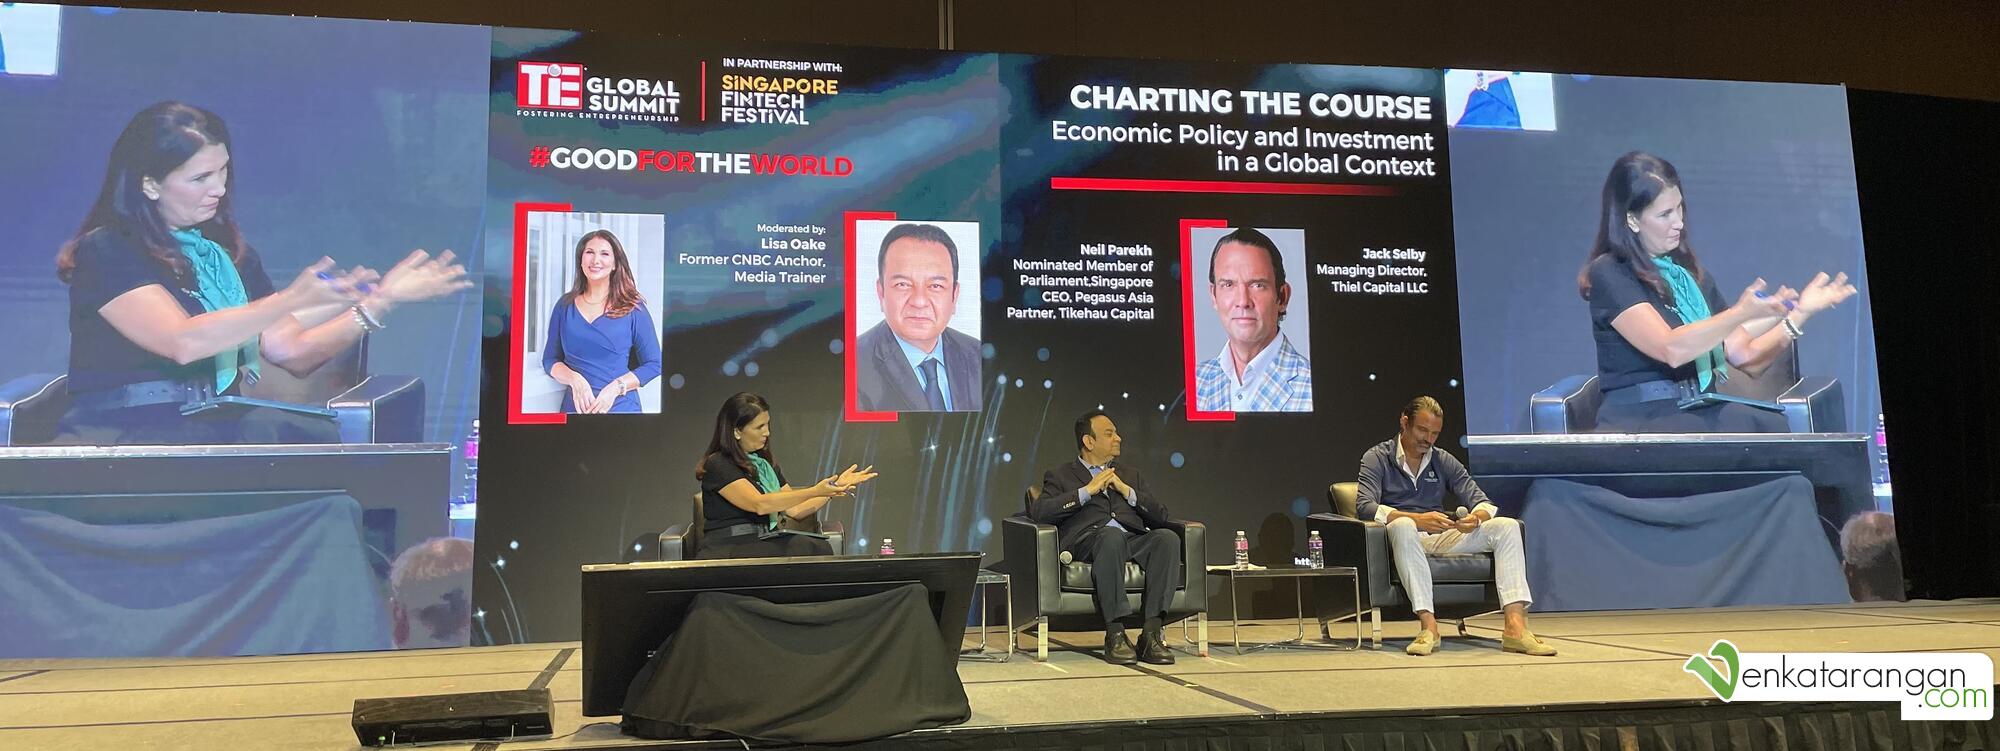 Lisa Oake in conversation with Neil Parekh, Member of Parliament Singapore and Jack Selby of Thiel Capital LLC